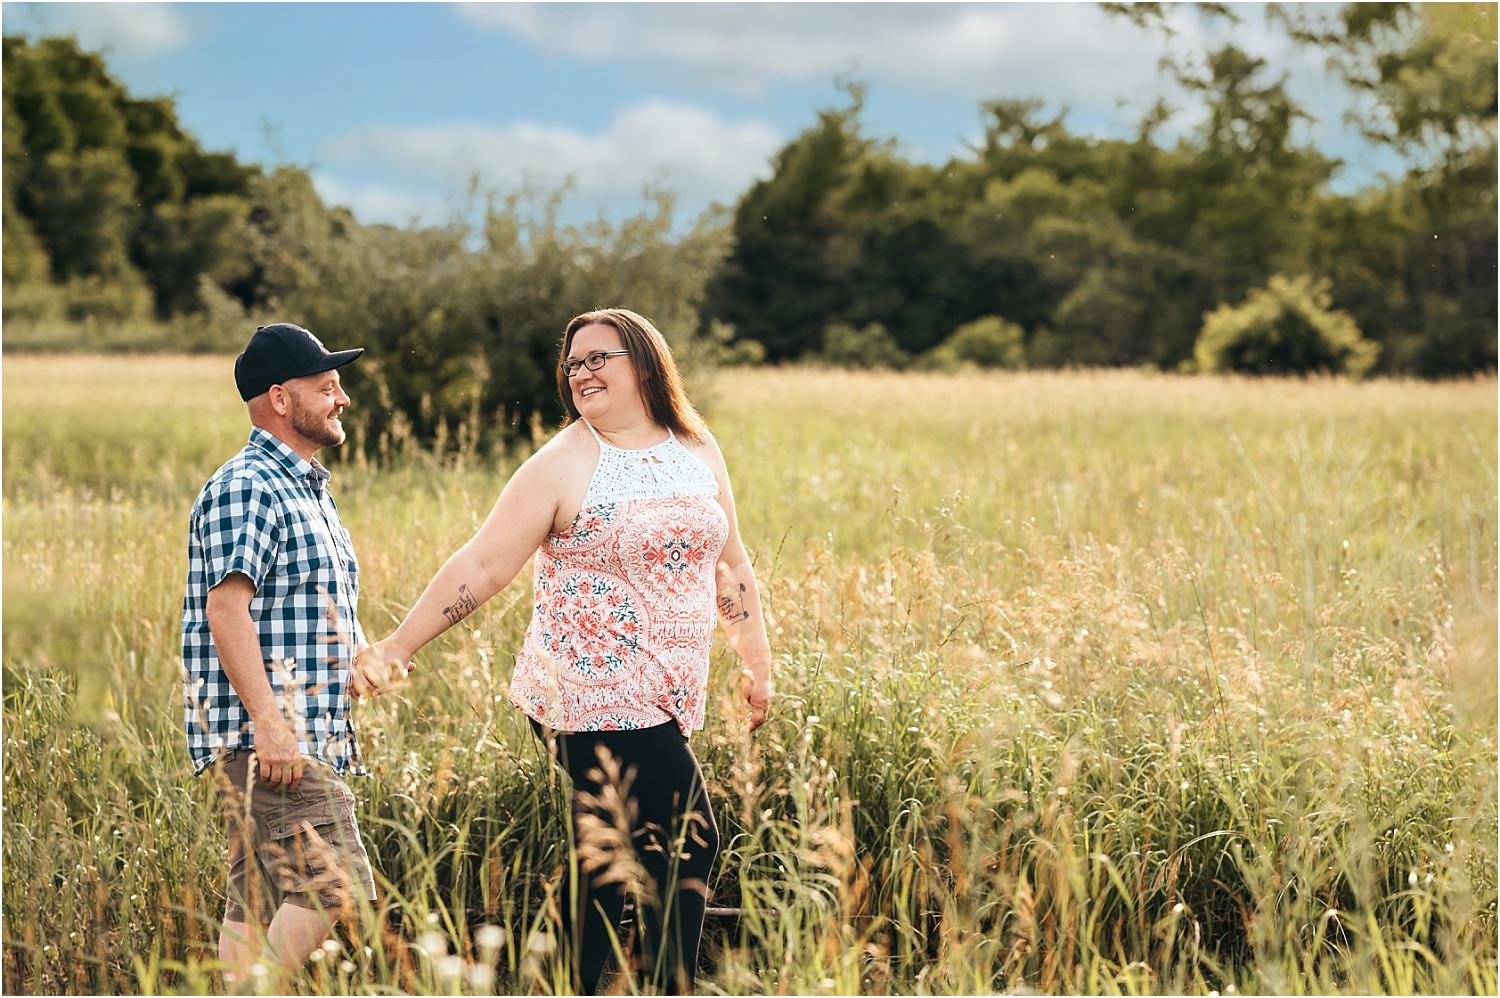 Nature engagement session | Kristen and Michael